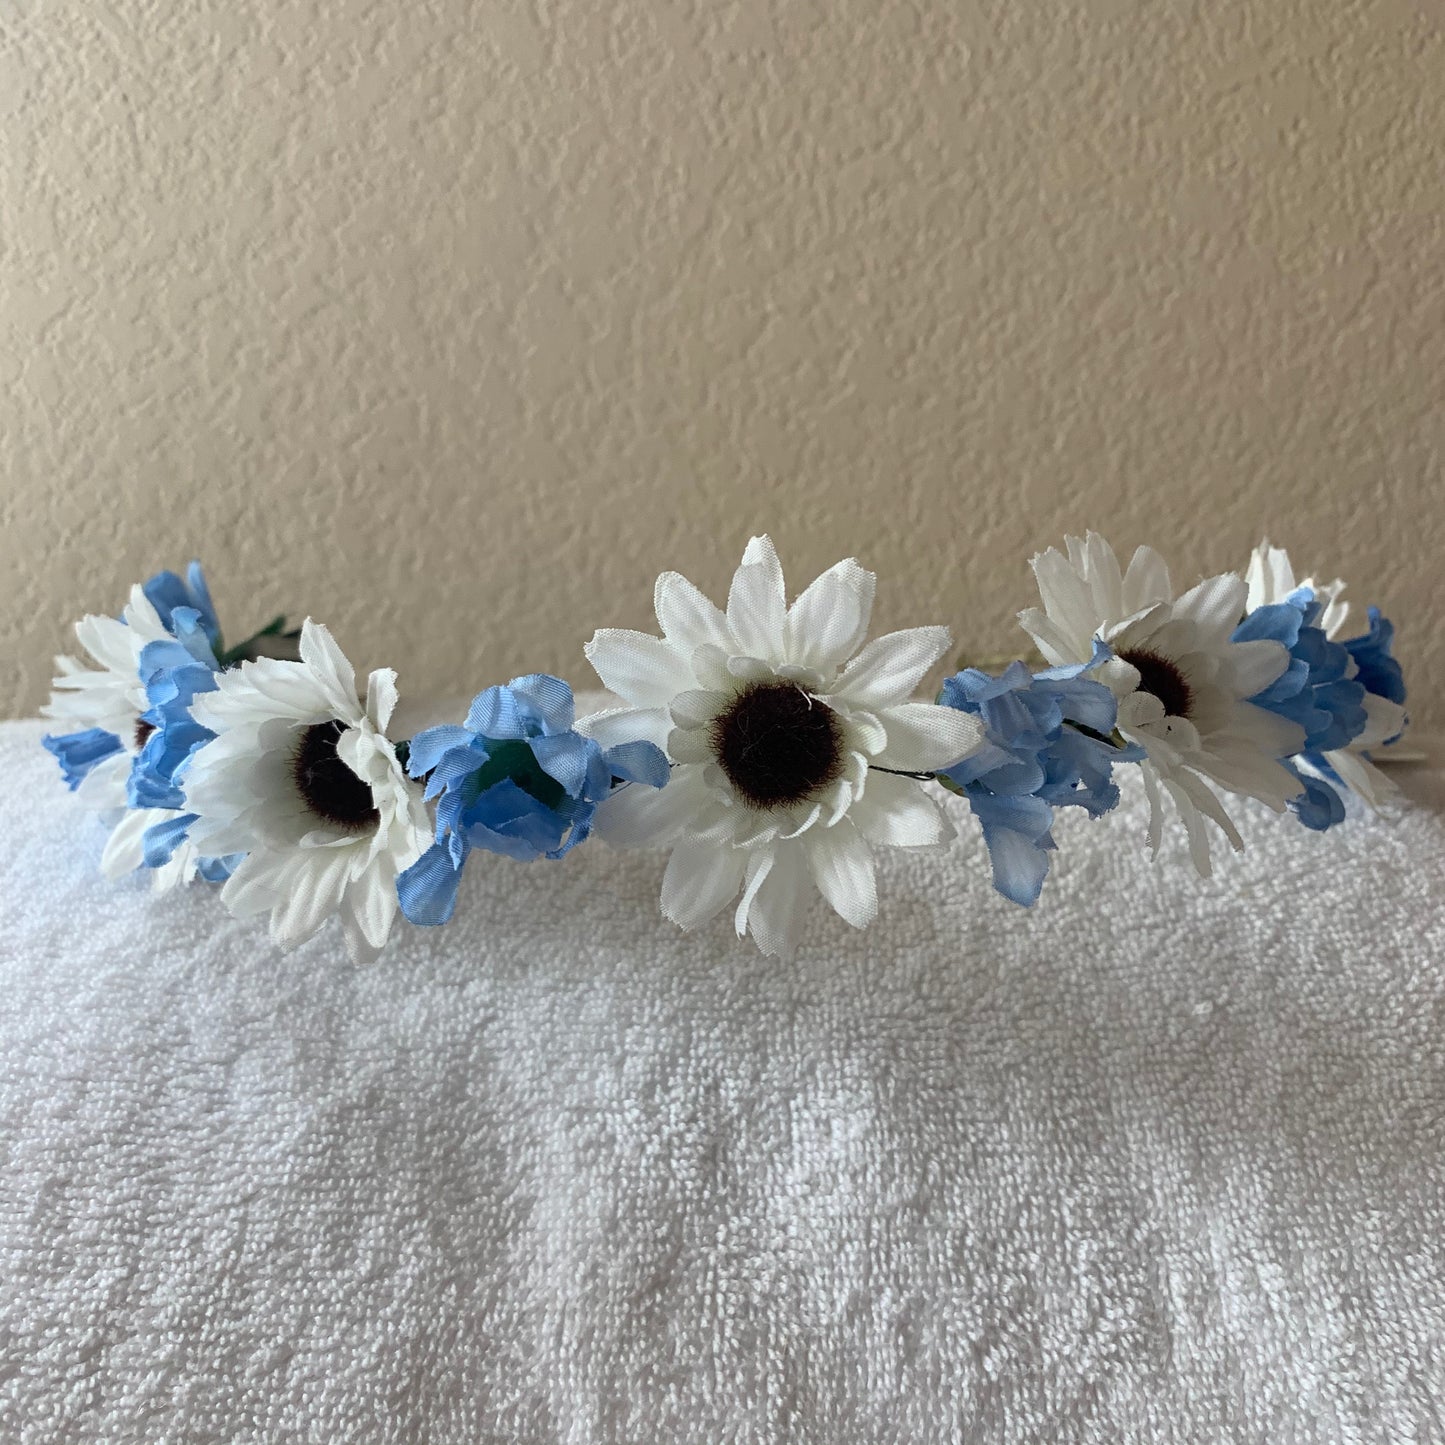 Small Wreath Lighted - White Pointy Daisies with Light Blue Buds